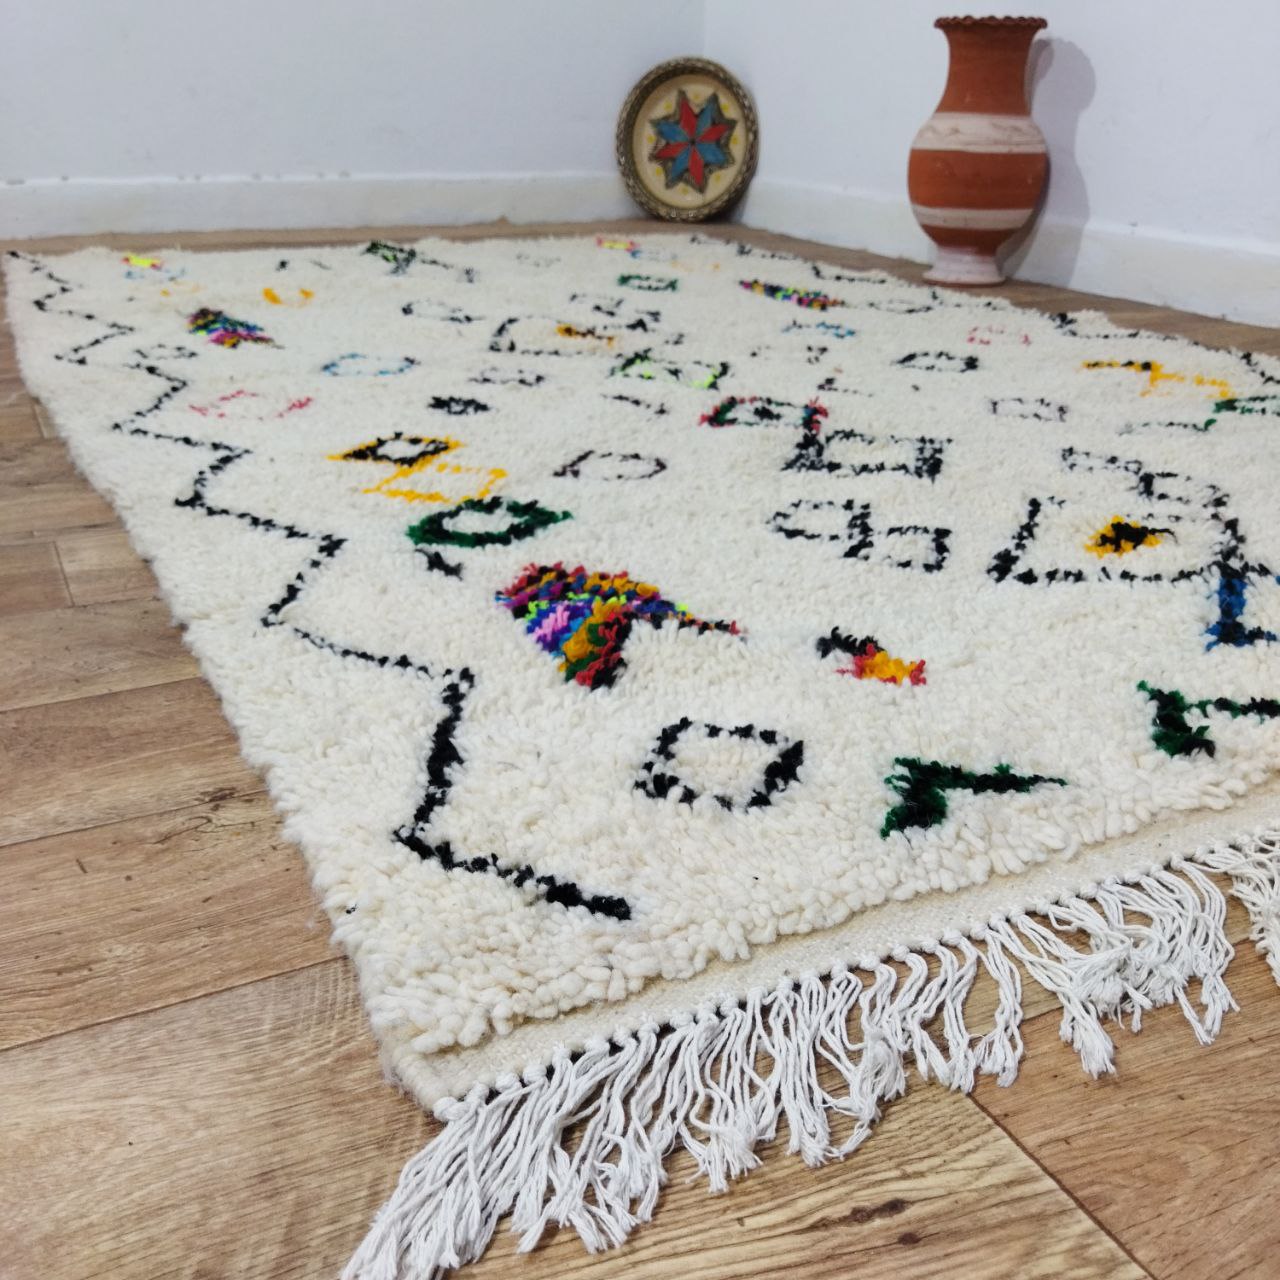 Discover Cultural Treasures - Moroccan Handcrafted Azilal Berber Rugs